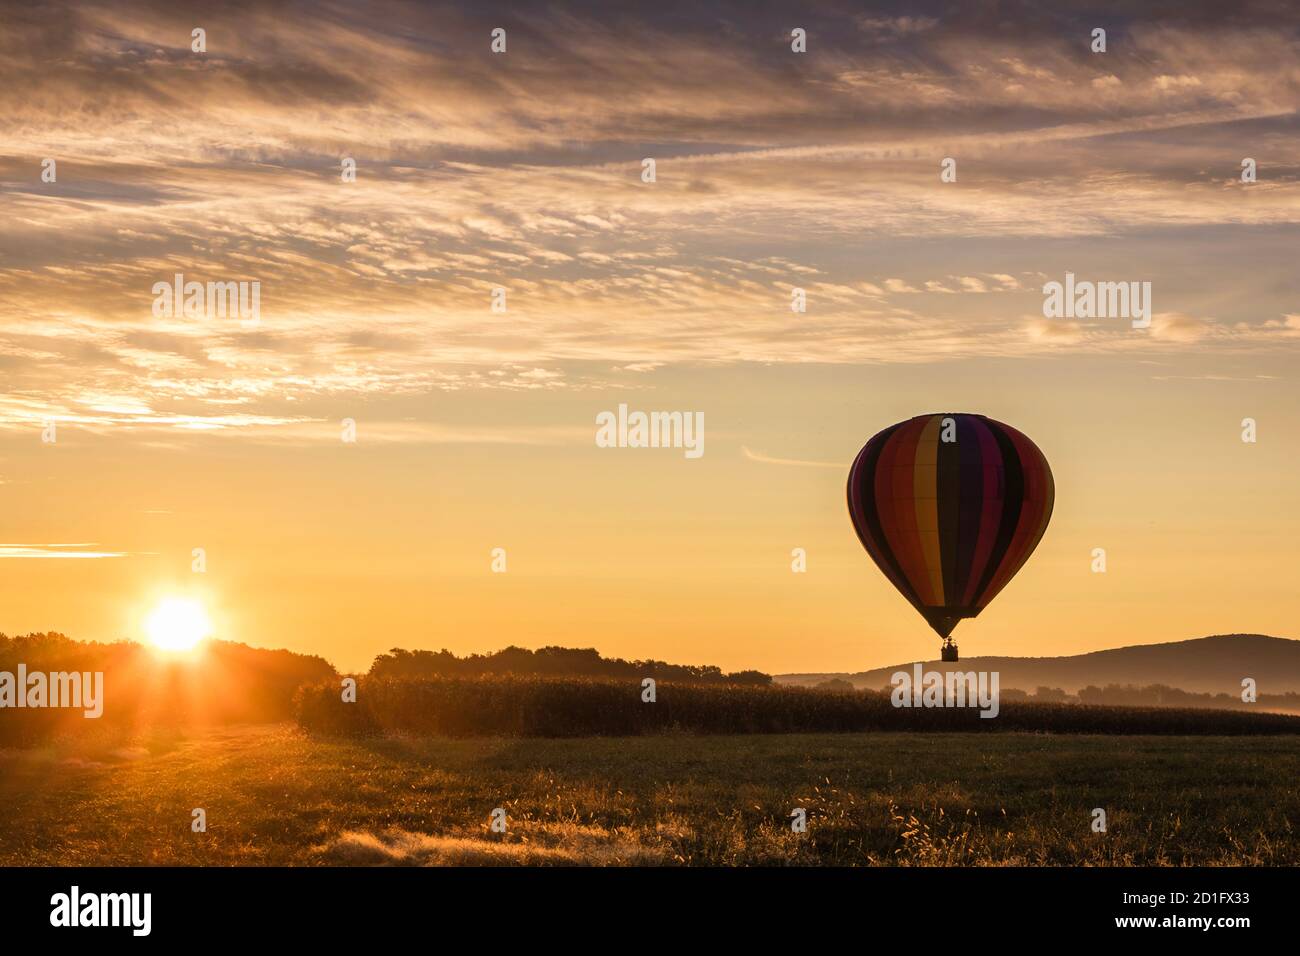 Hot Air Balloon in colorful rainbow stripes begins ascent over farm field as sun rises golden sky Stock Photo